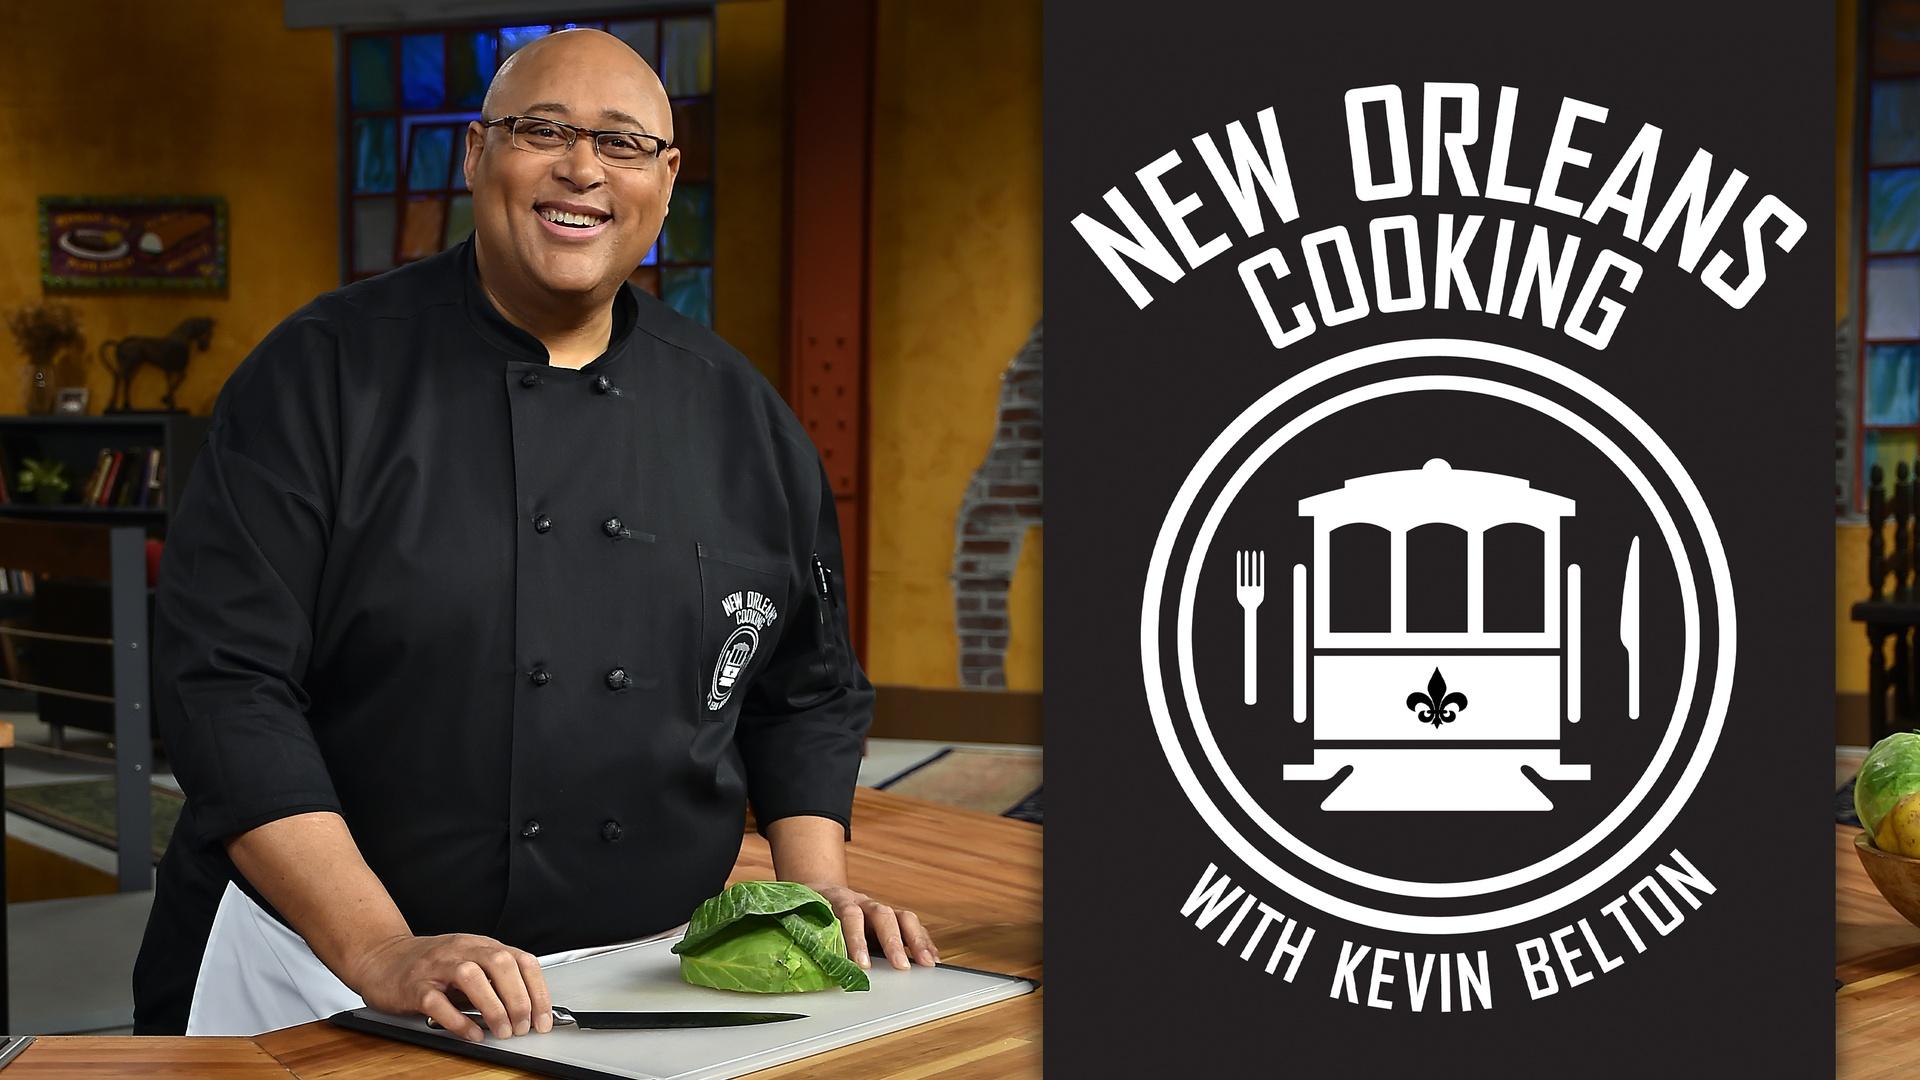 Classic Creole New Orleans Cooking with Kevin Belton NJ PBS